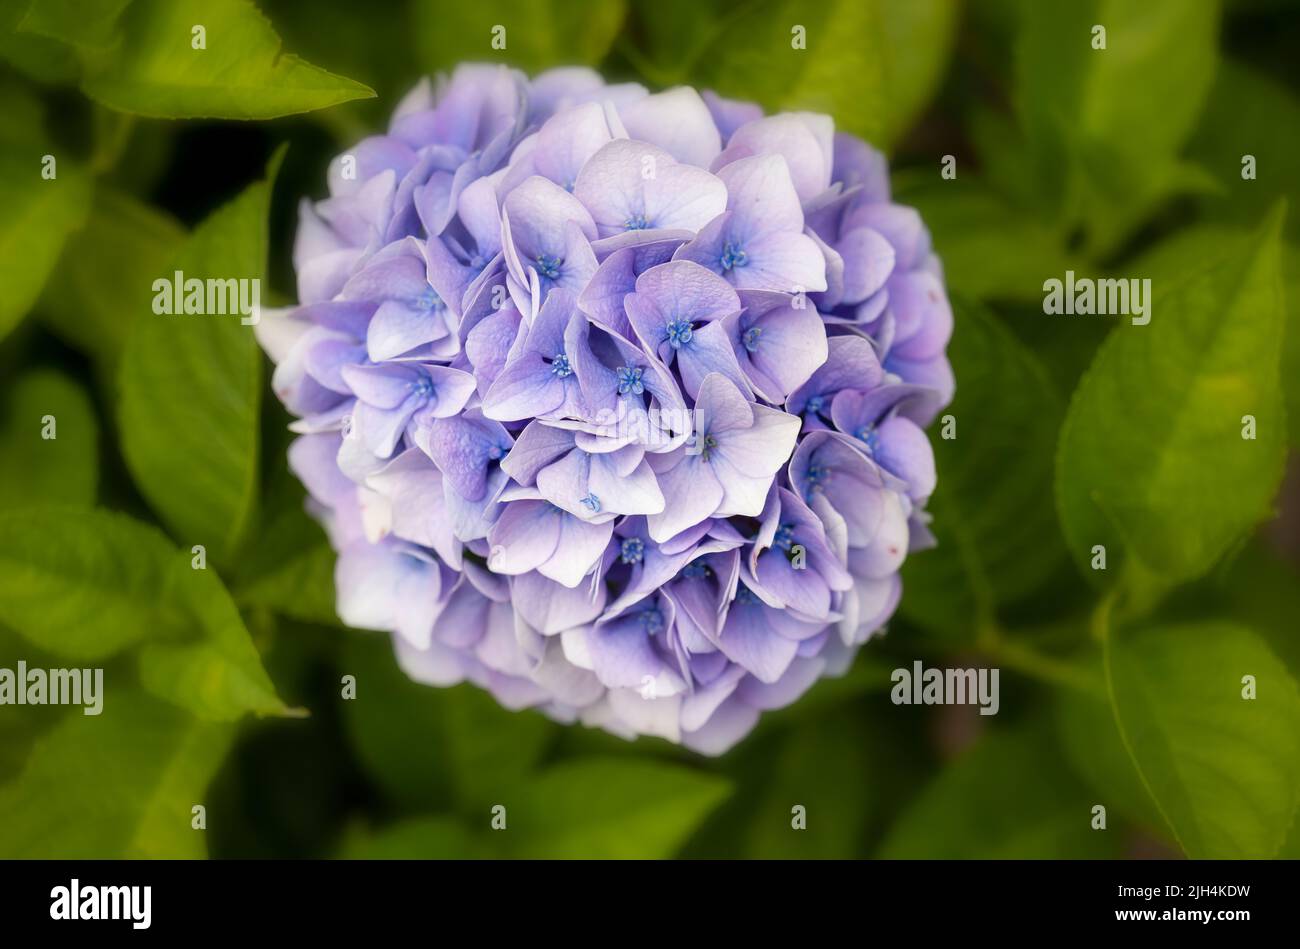 A beautiful, single flower head of a blue Hydrangea photographed against lush green leaves Stock Photo